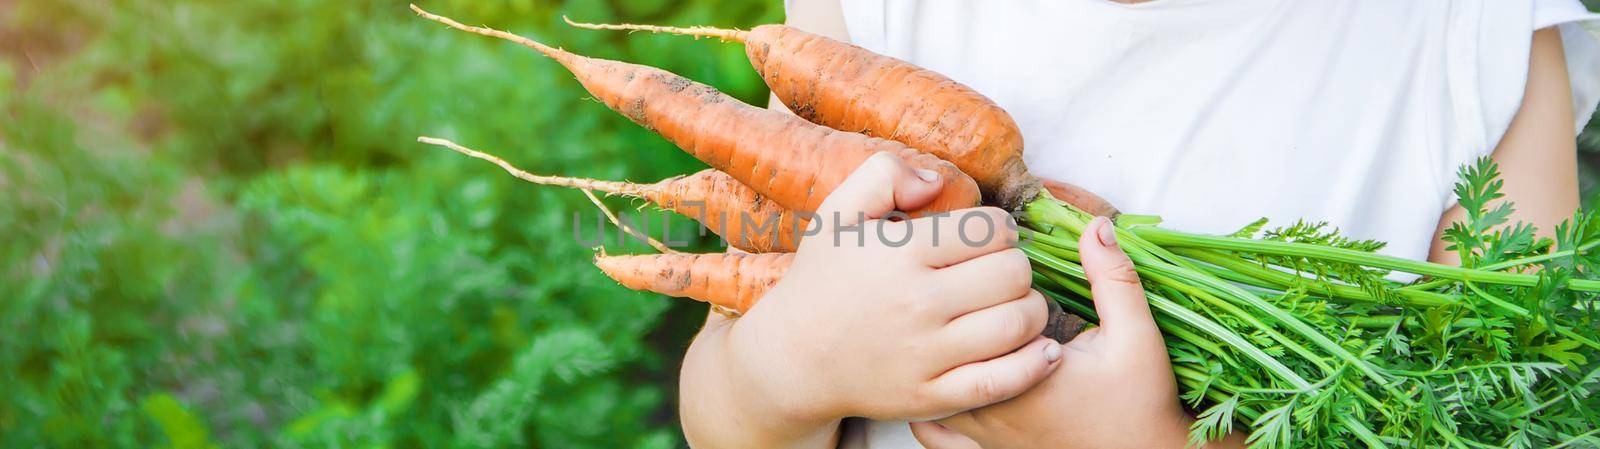 organic homemade vegetables harvest carrots and beets by yanadjana